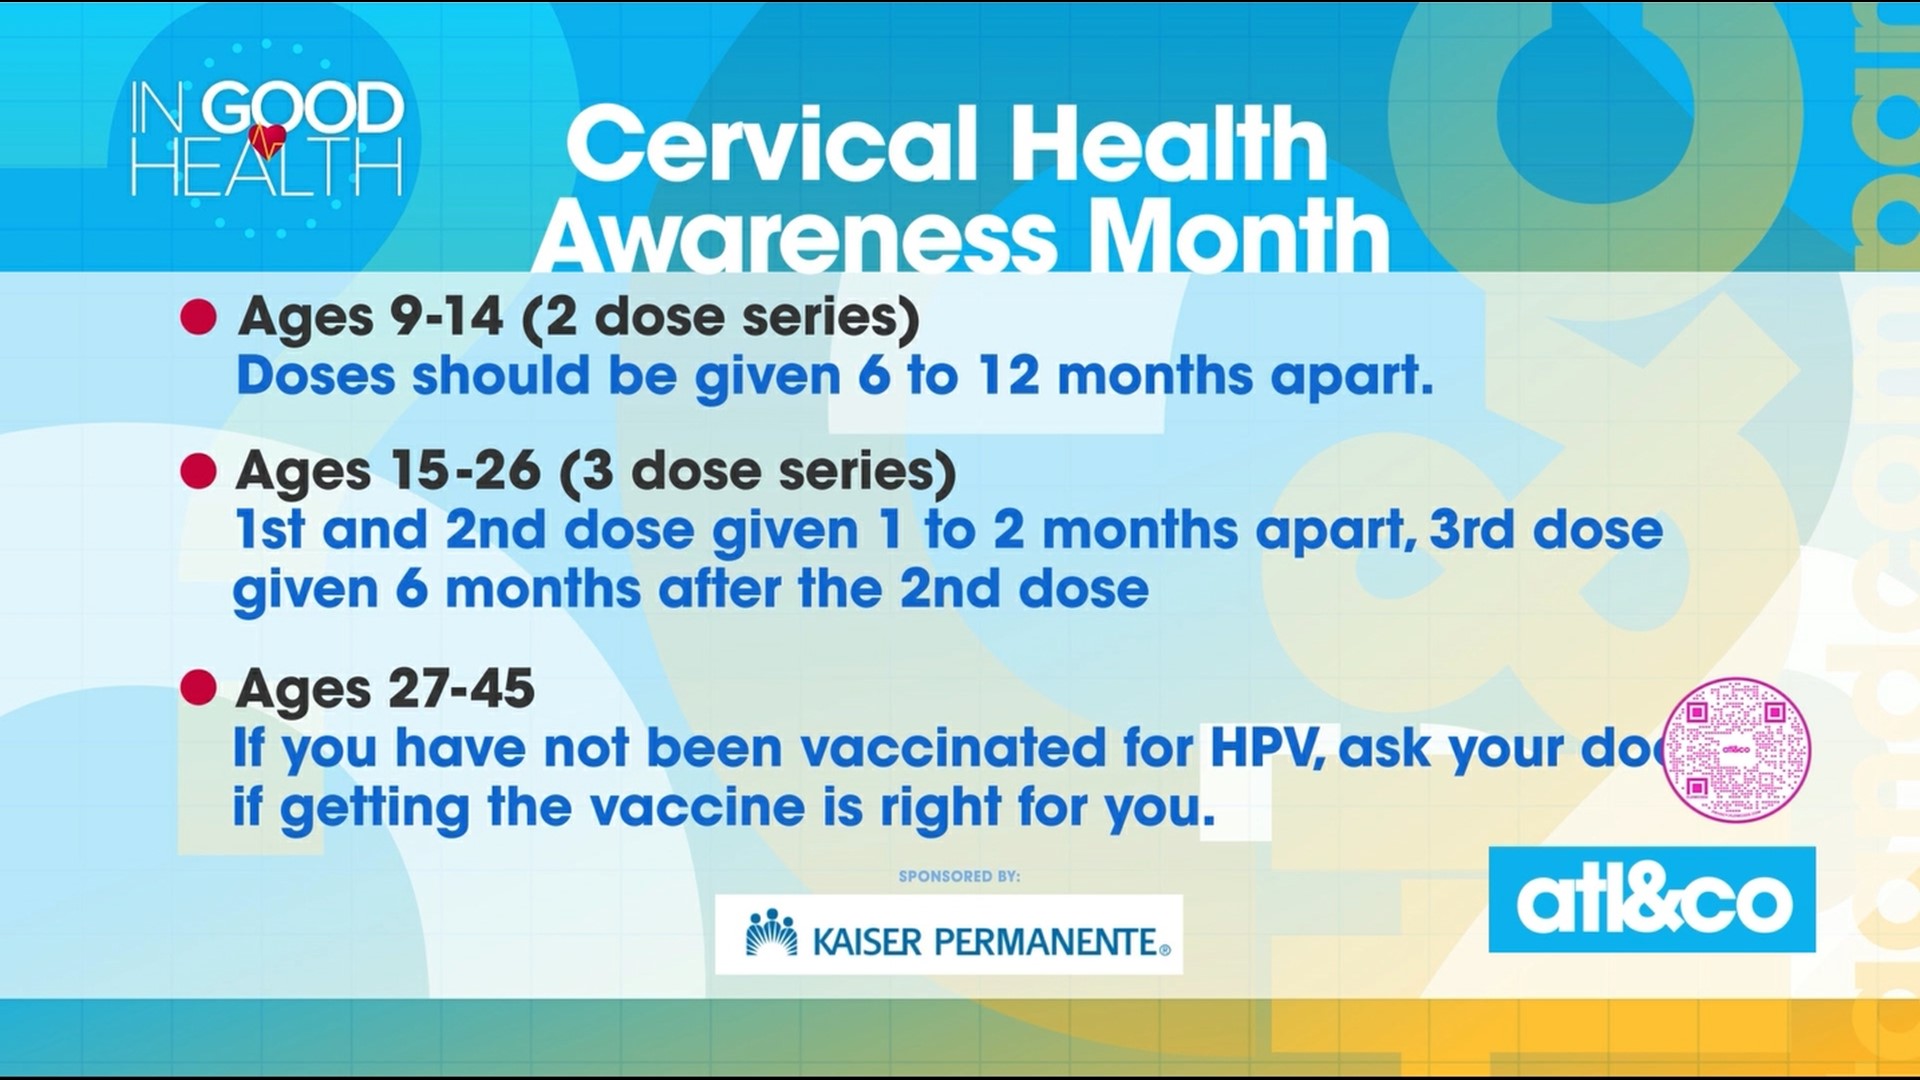 Gynecologic oncologist Dr. Paul Mayor from Kaiser Permanente shares important health tips about HPV and cervical cancer prevention.